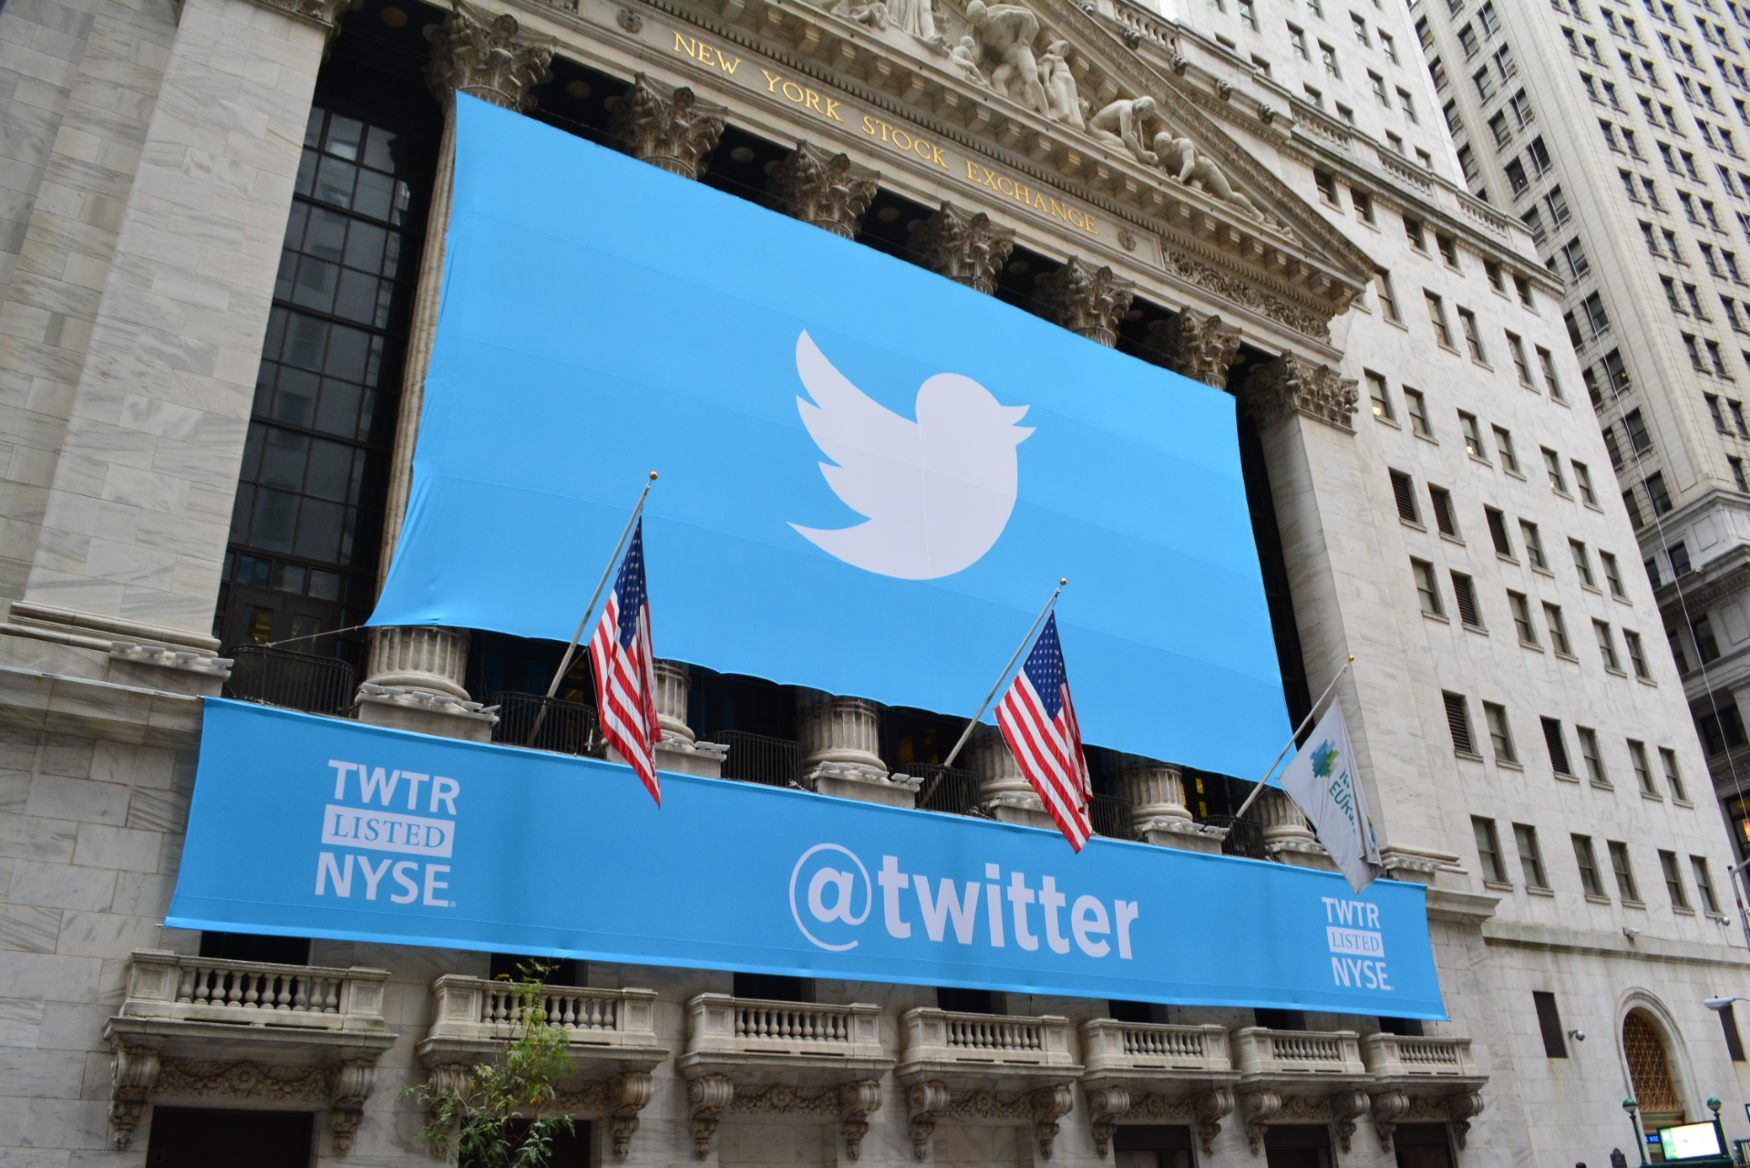 Twitter banners hang on outside of the New York Stock Exchange building